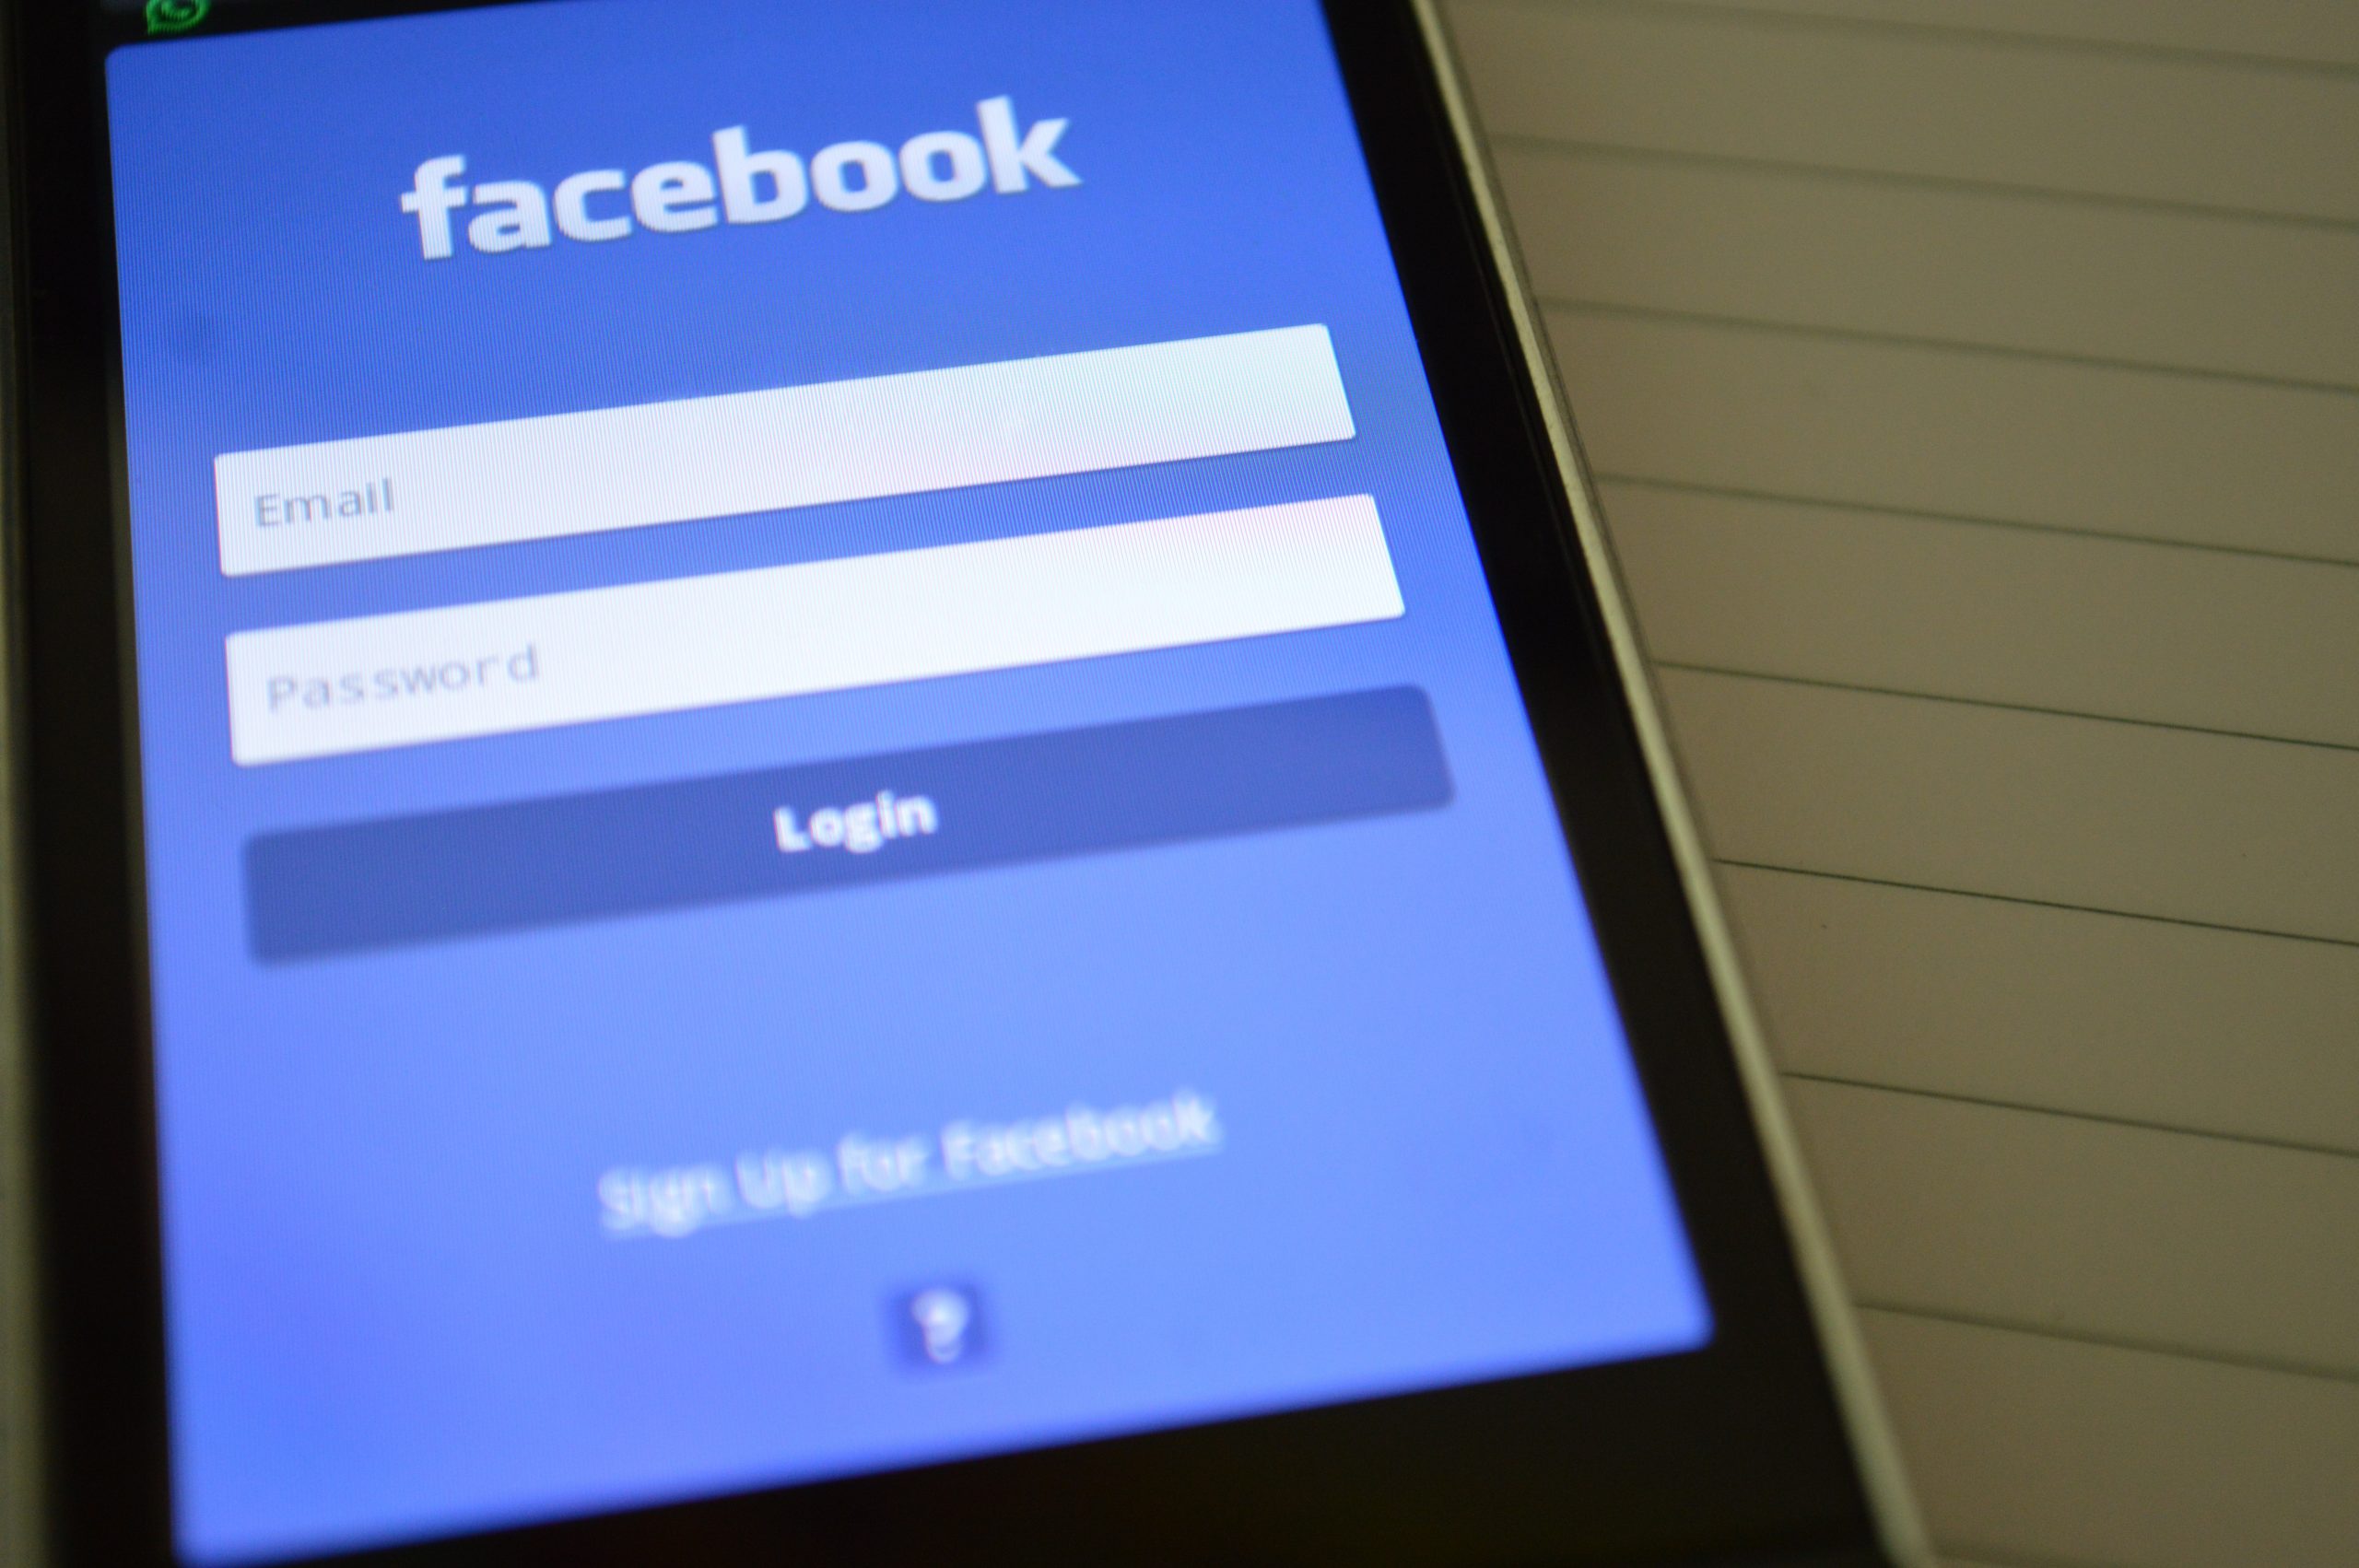 how to change your name on facebook